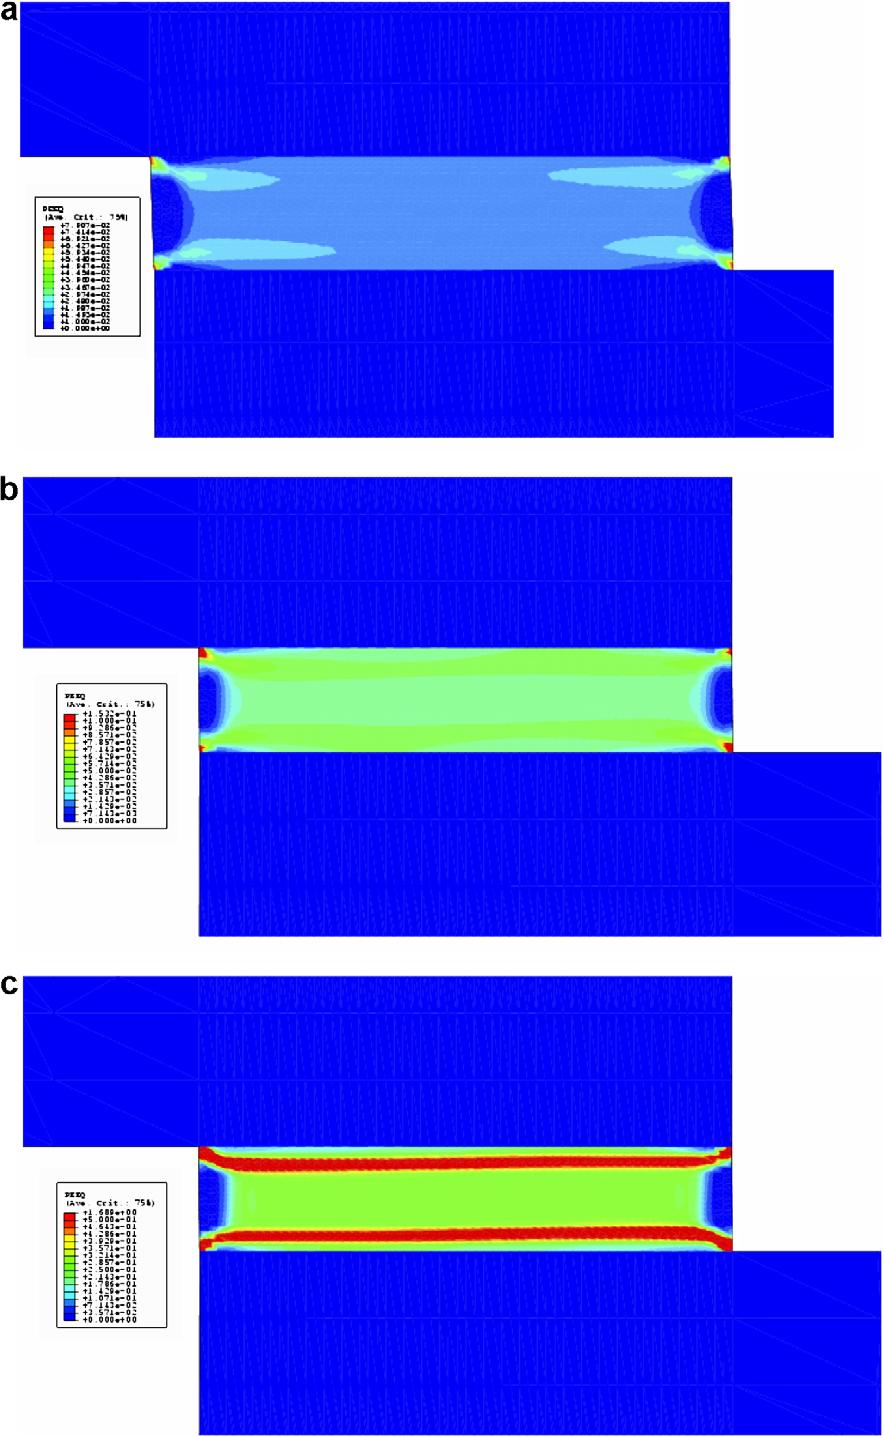 1302 W.H. Moy, Y.-L. Shen / Microelectronics Reliability 47 (2007) 1300 1305 Fig. 3. Contours of equivalent plastic strain in solder after a nominal shear strain history of (a) 0!